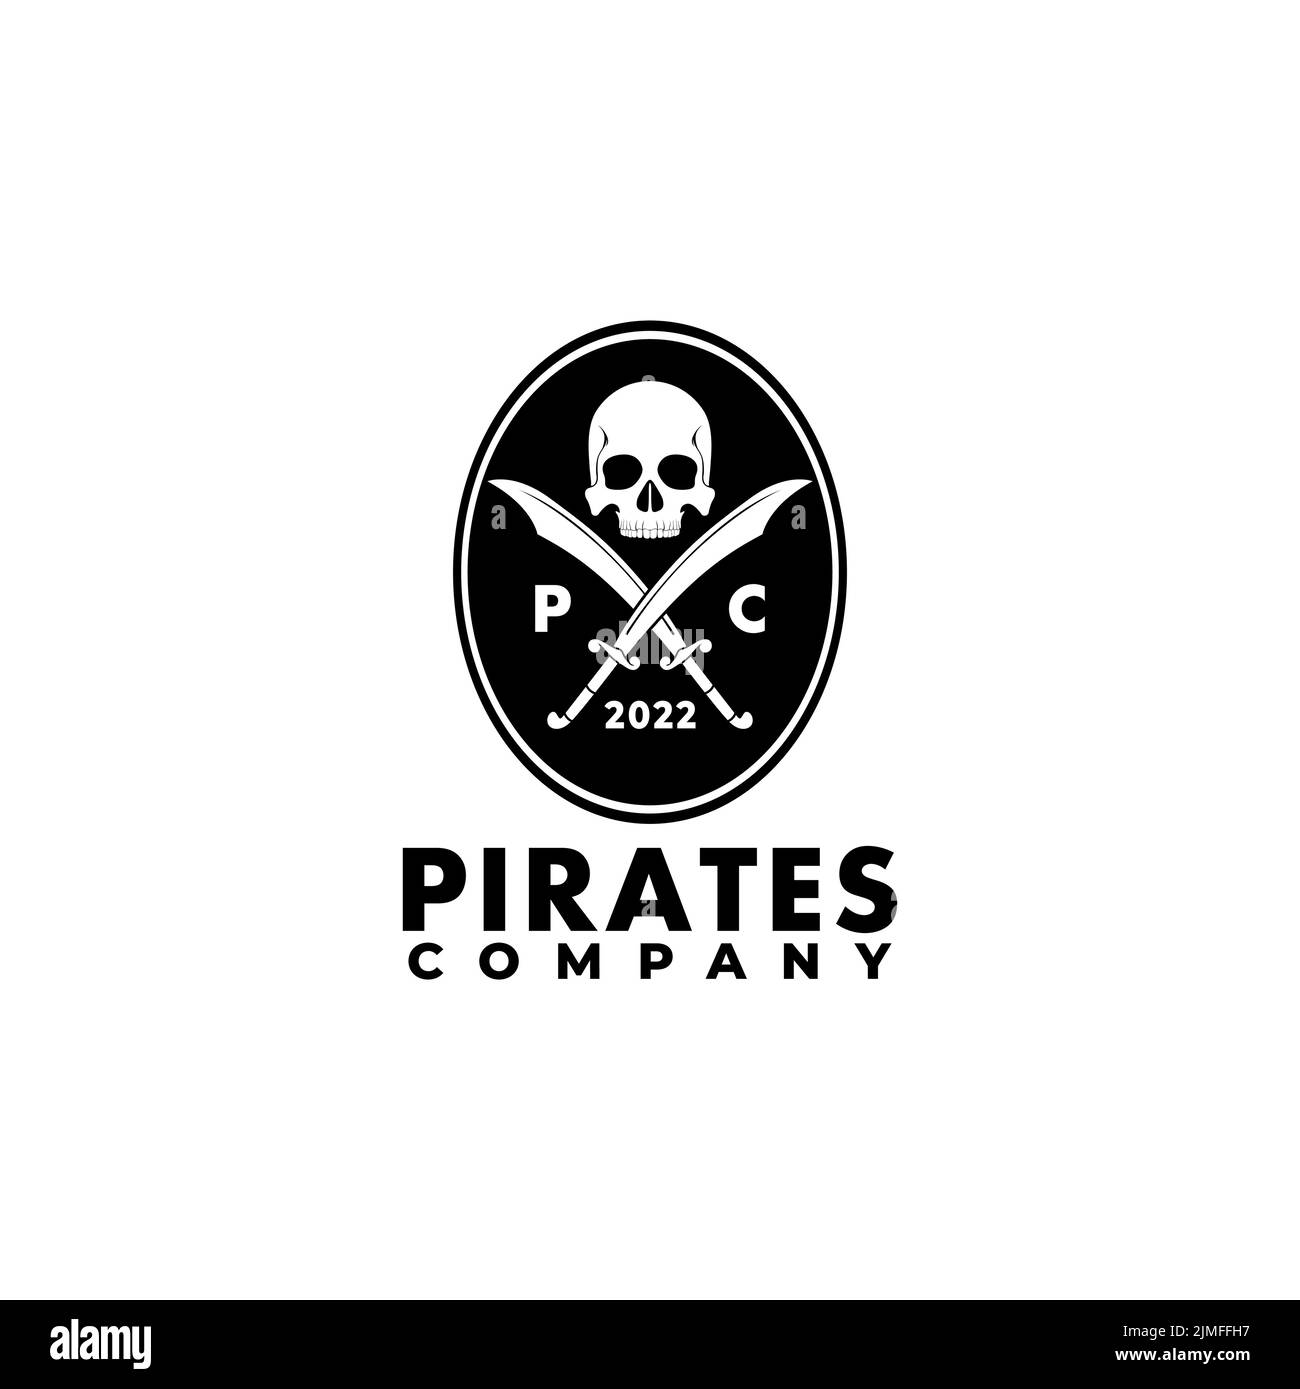 Pirate Emblem Logo With Skull and Crossed Sword Design Inspiration Stock Vector